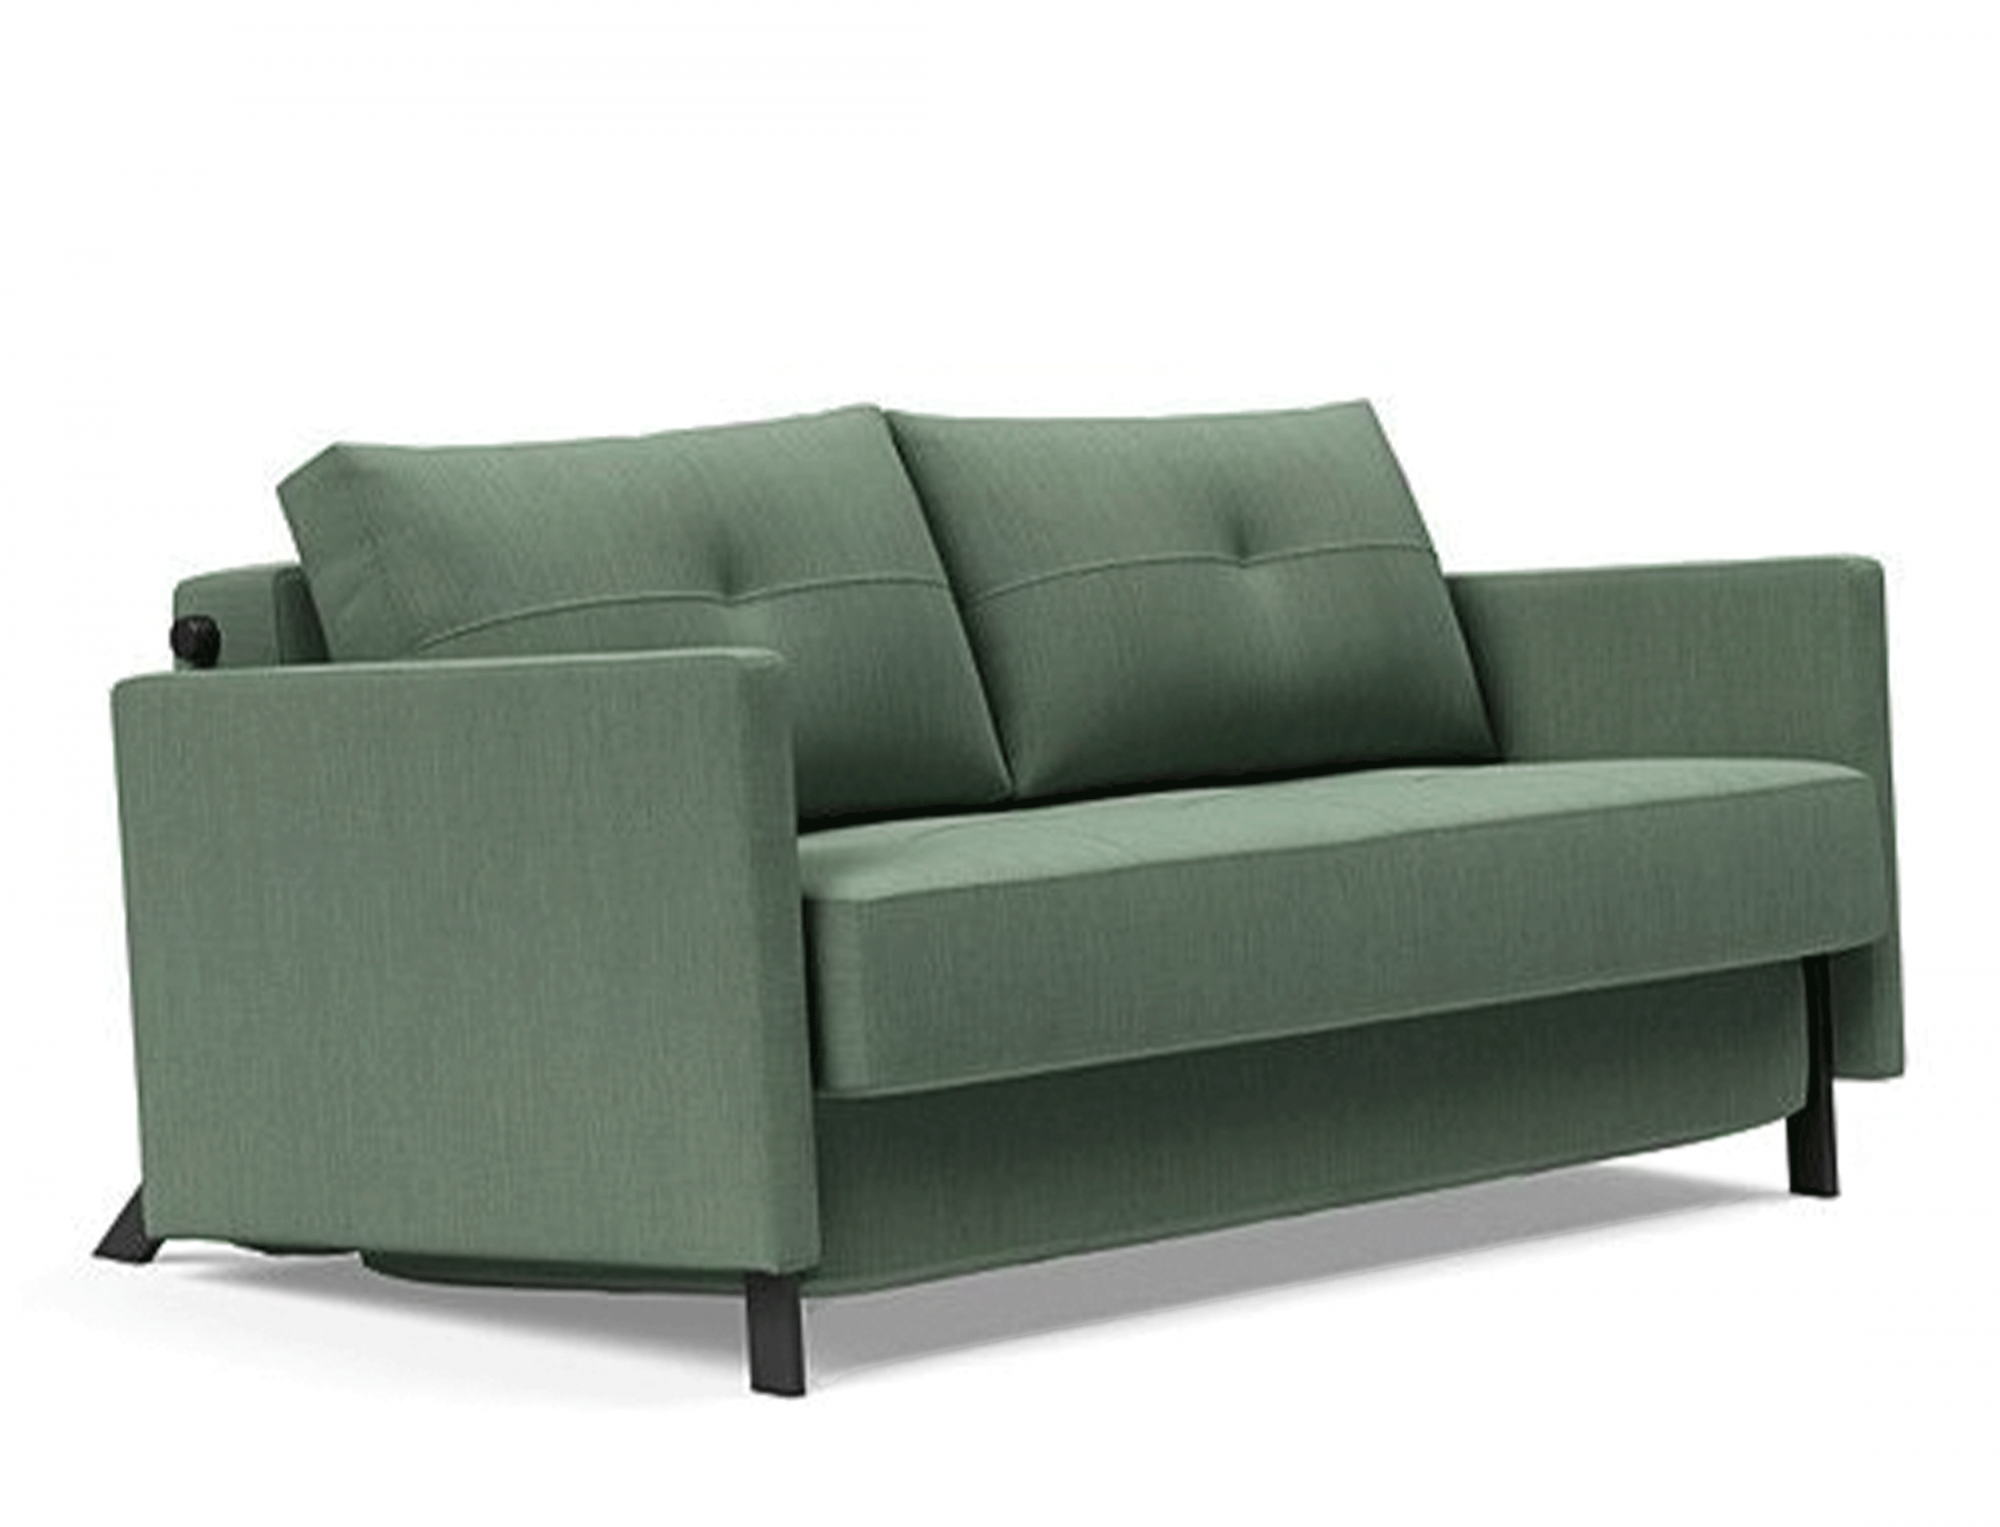 Cubed 160 Queen Sofa Bed With Arms - Innovation Living